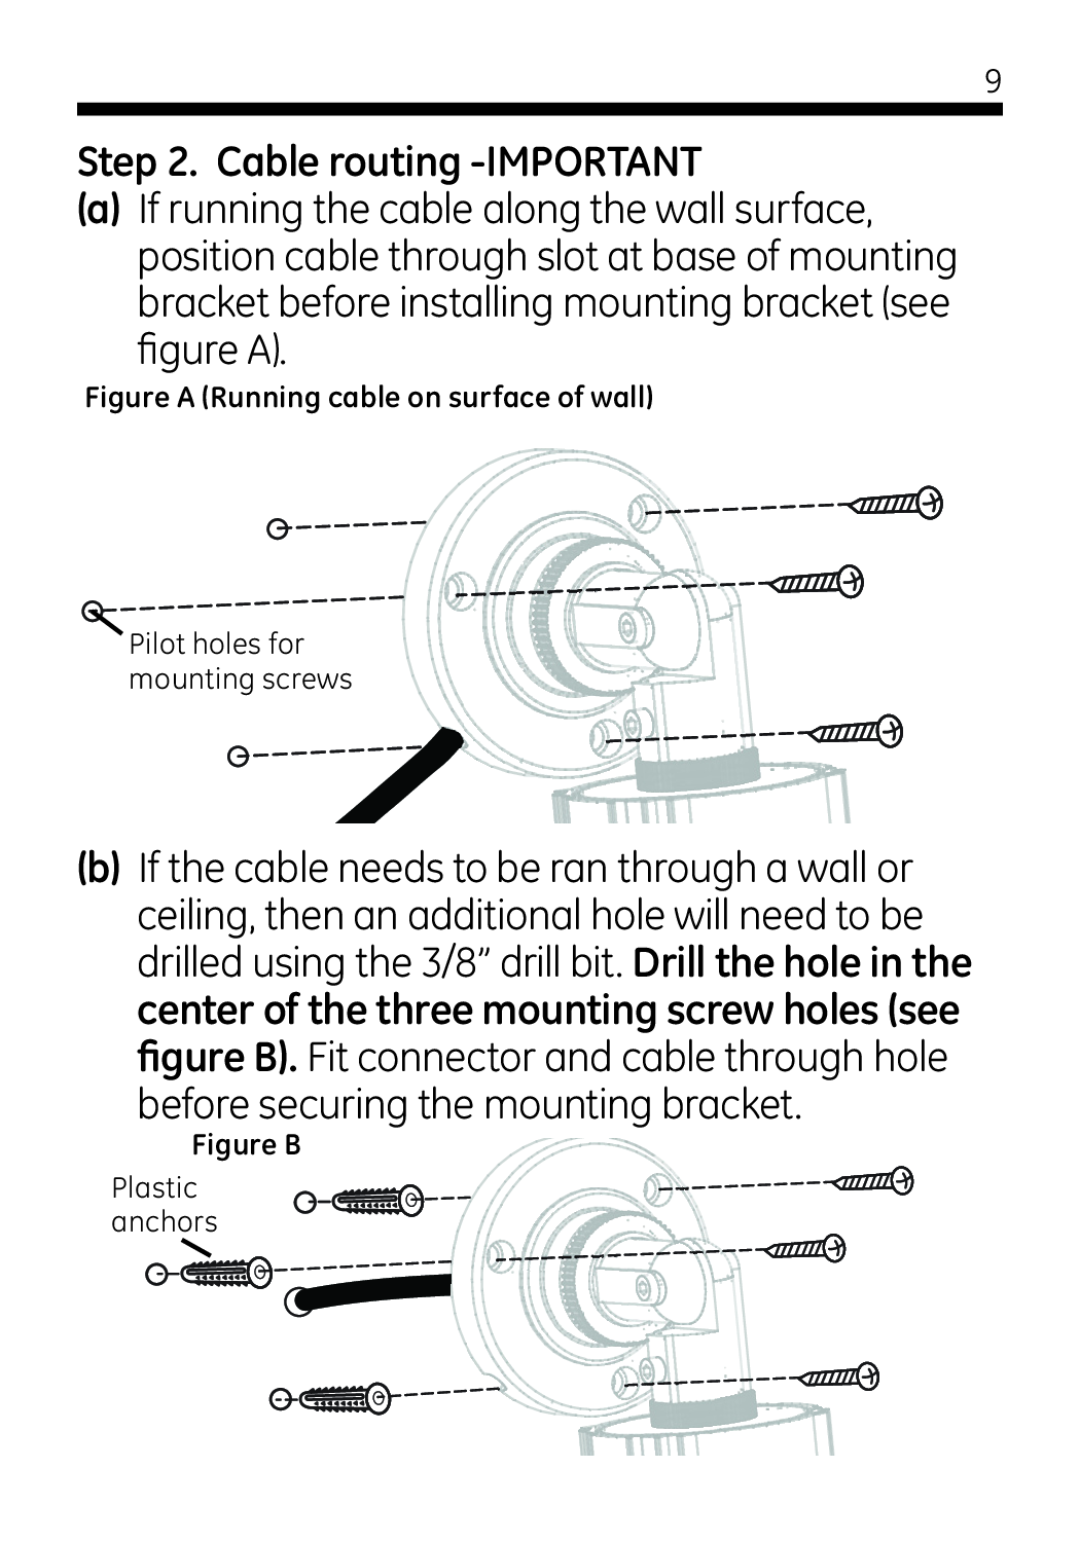 Jasco 45245 user manual Cable routing -IMPORTANT, figure A, before securing the mounting bracket 